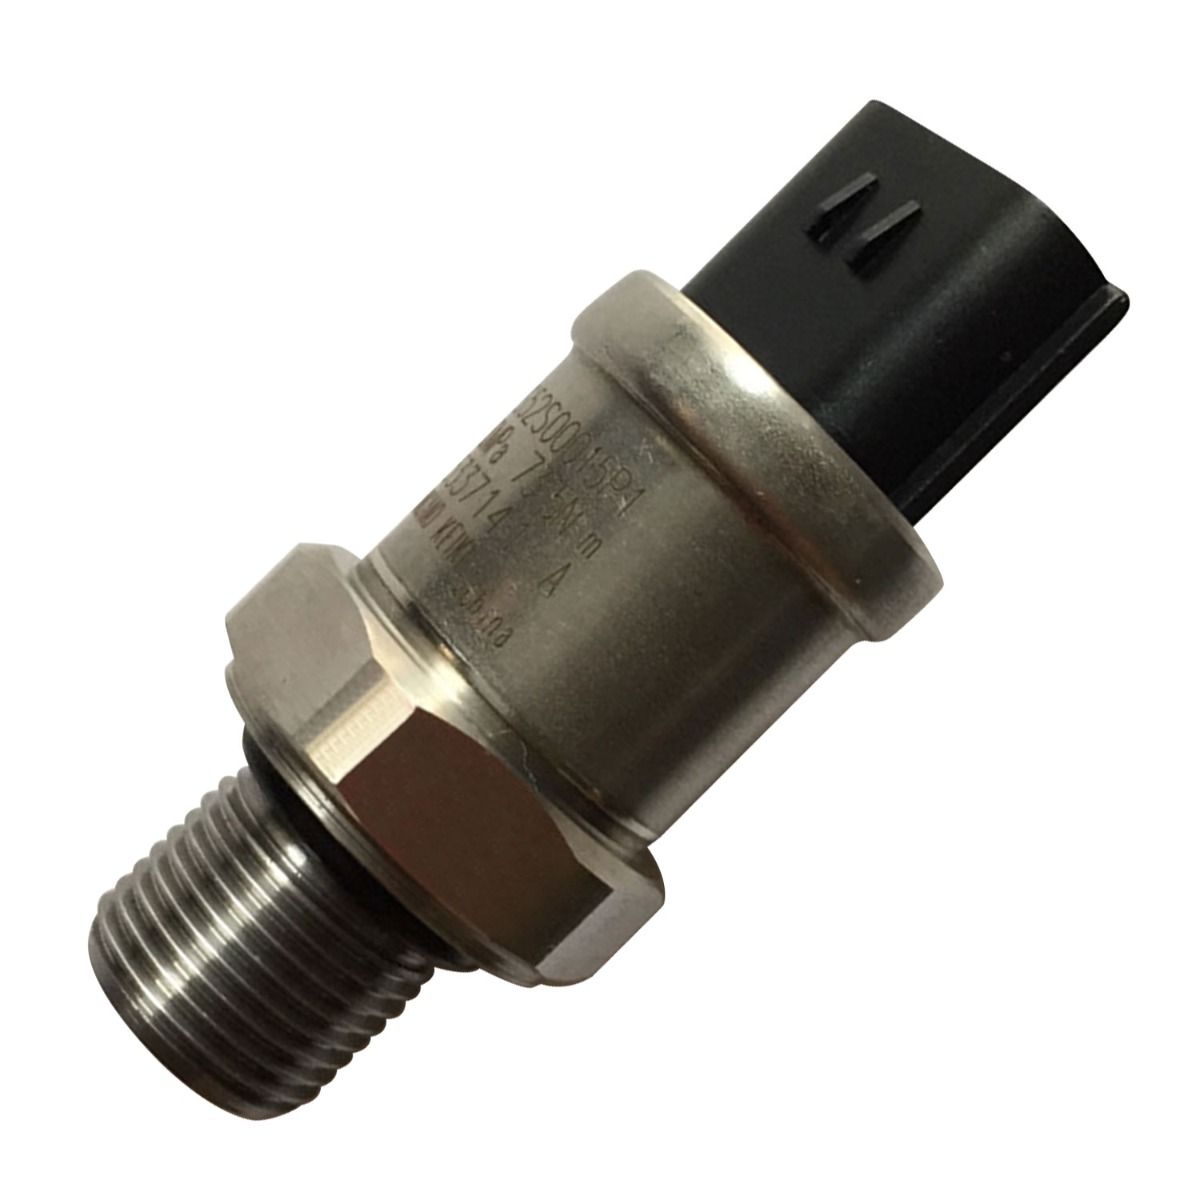 Blueview pressure sensor YN52S00048P1,LS52S00015P1 for Kobelco SK200-8 and other machinery 